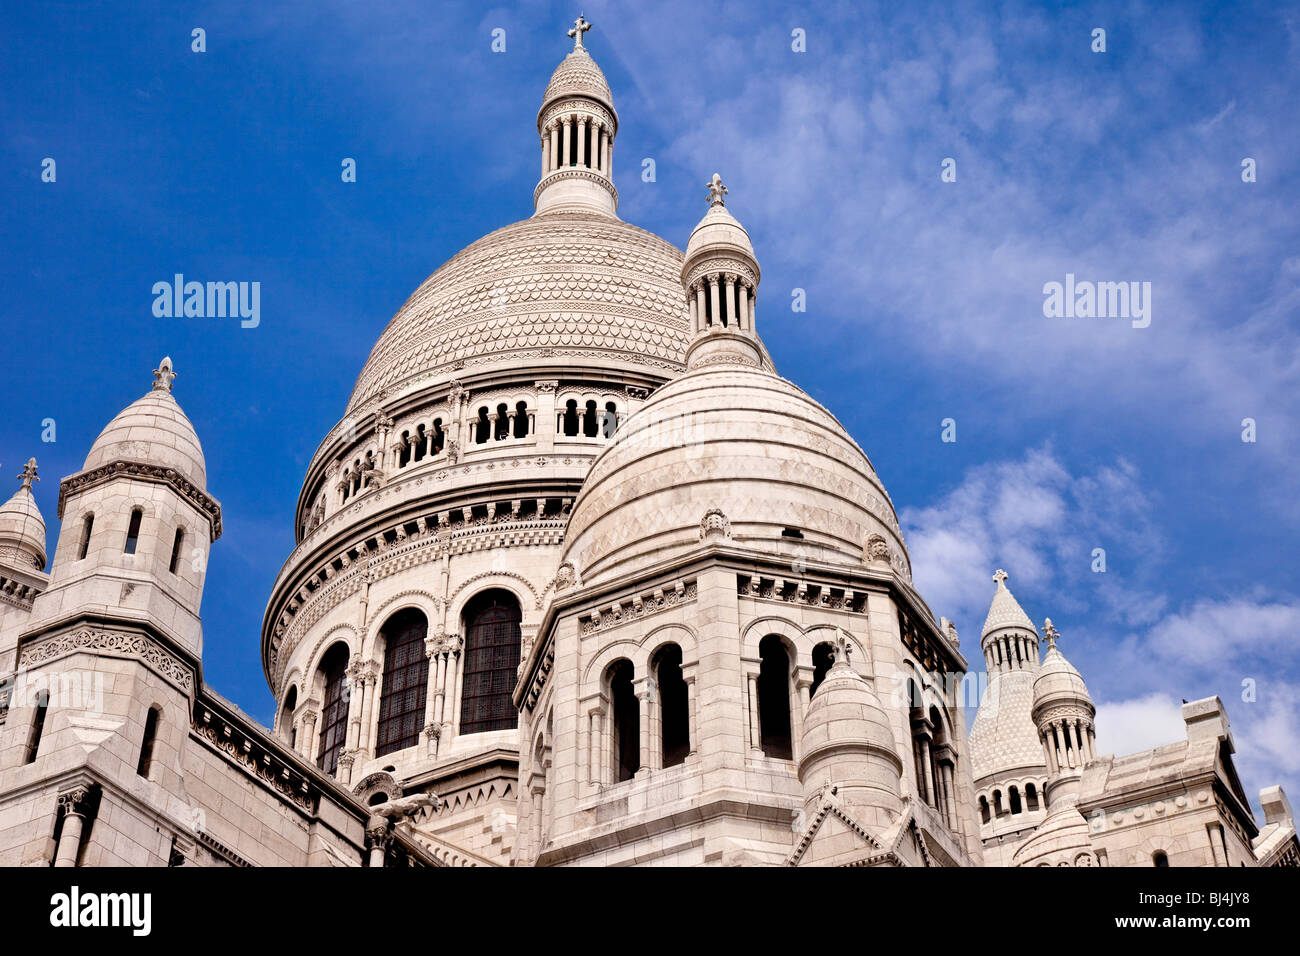 Domes of Sacre Coeur in Montmartre Paris France Stock Photo